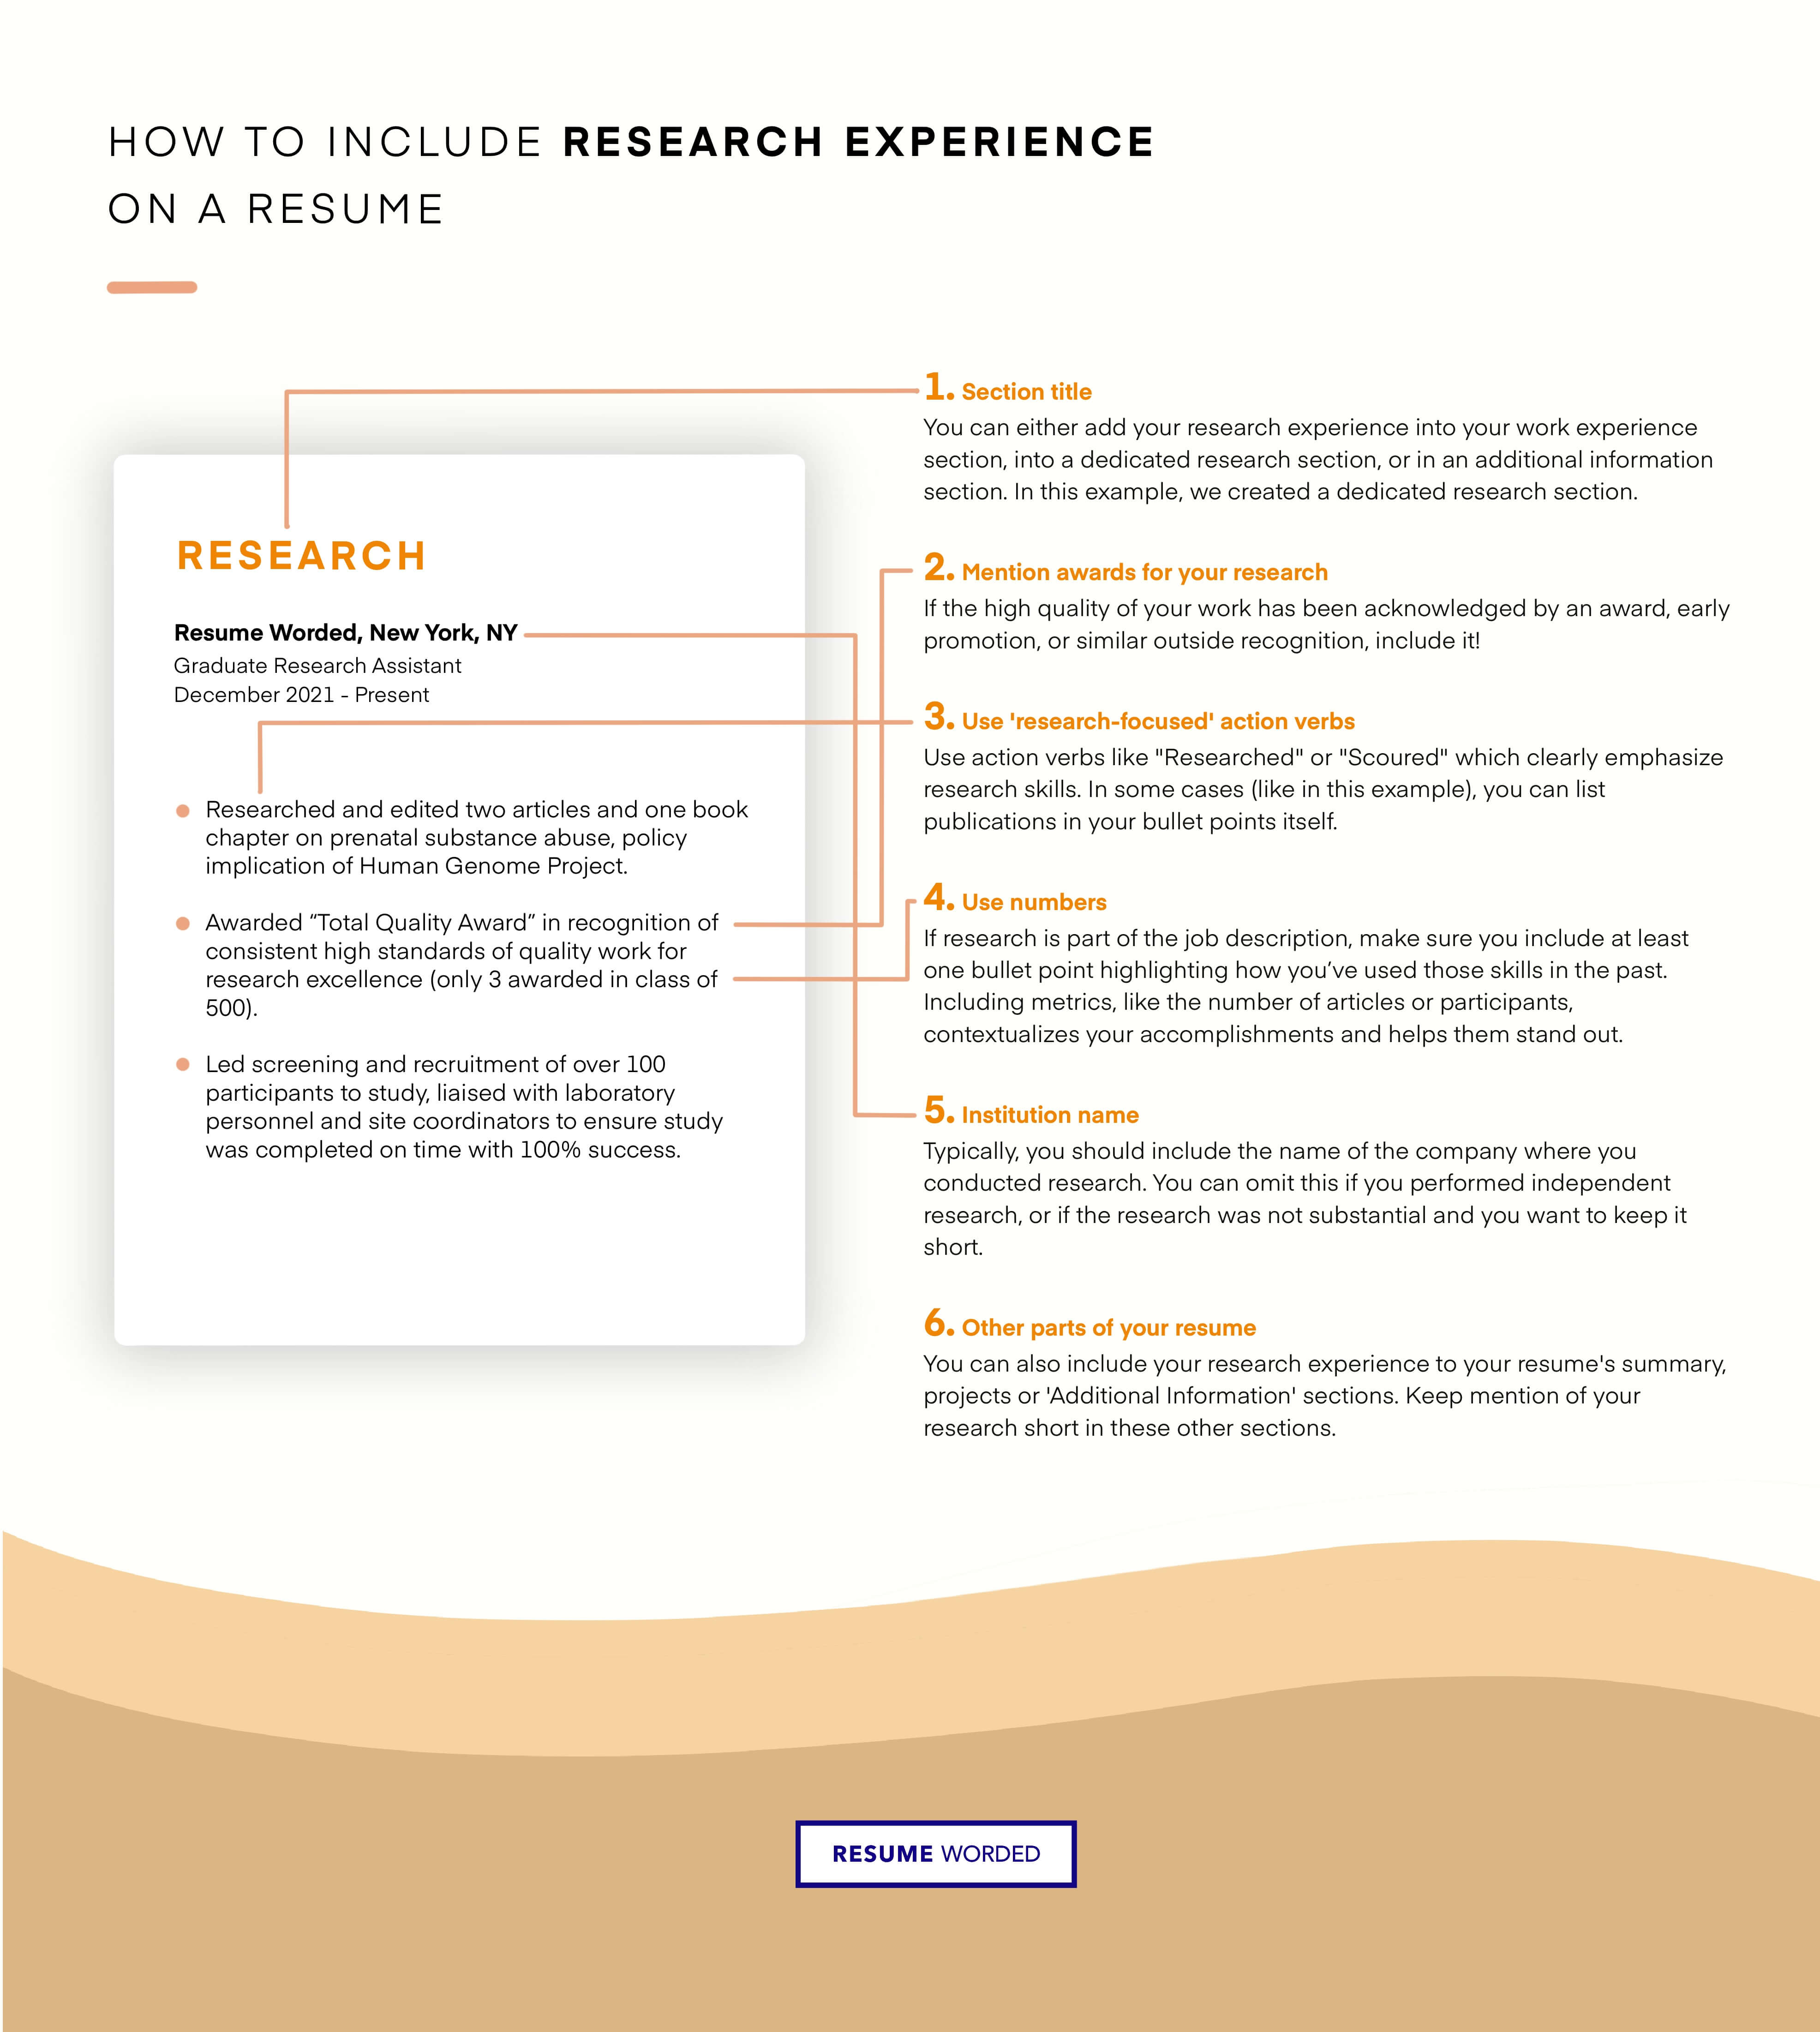 Tailor your resume to the industry you want to work in as a research assistant - Research Assistant Resume